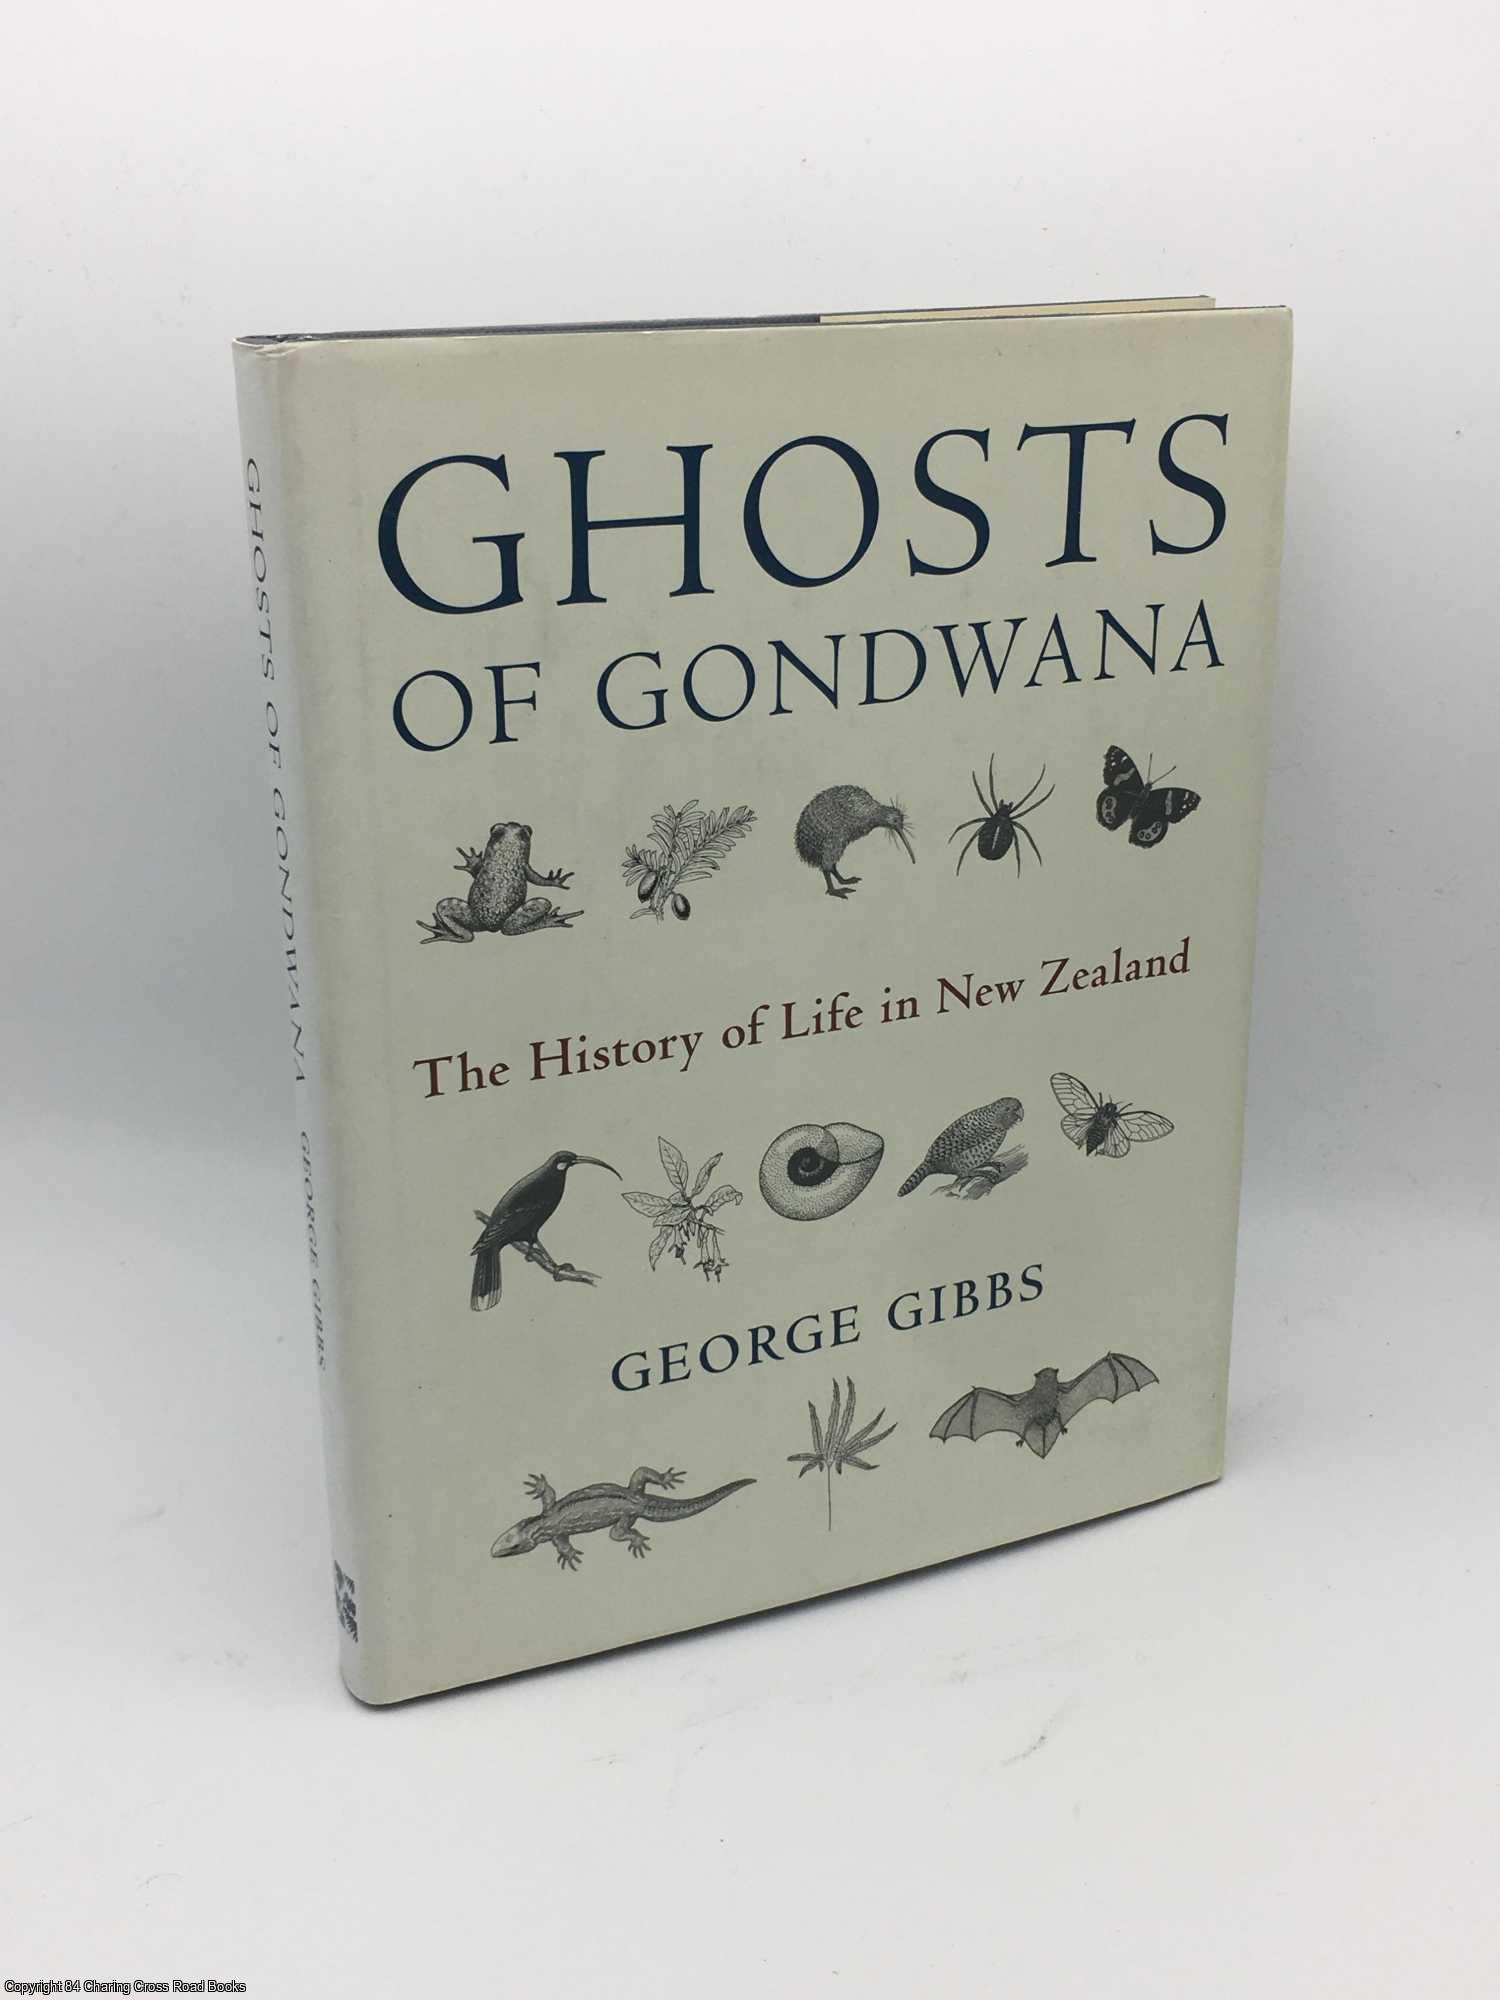 Gibbs, George - Ghosts of Gondwana: The History of Life in New Zealand